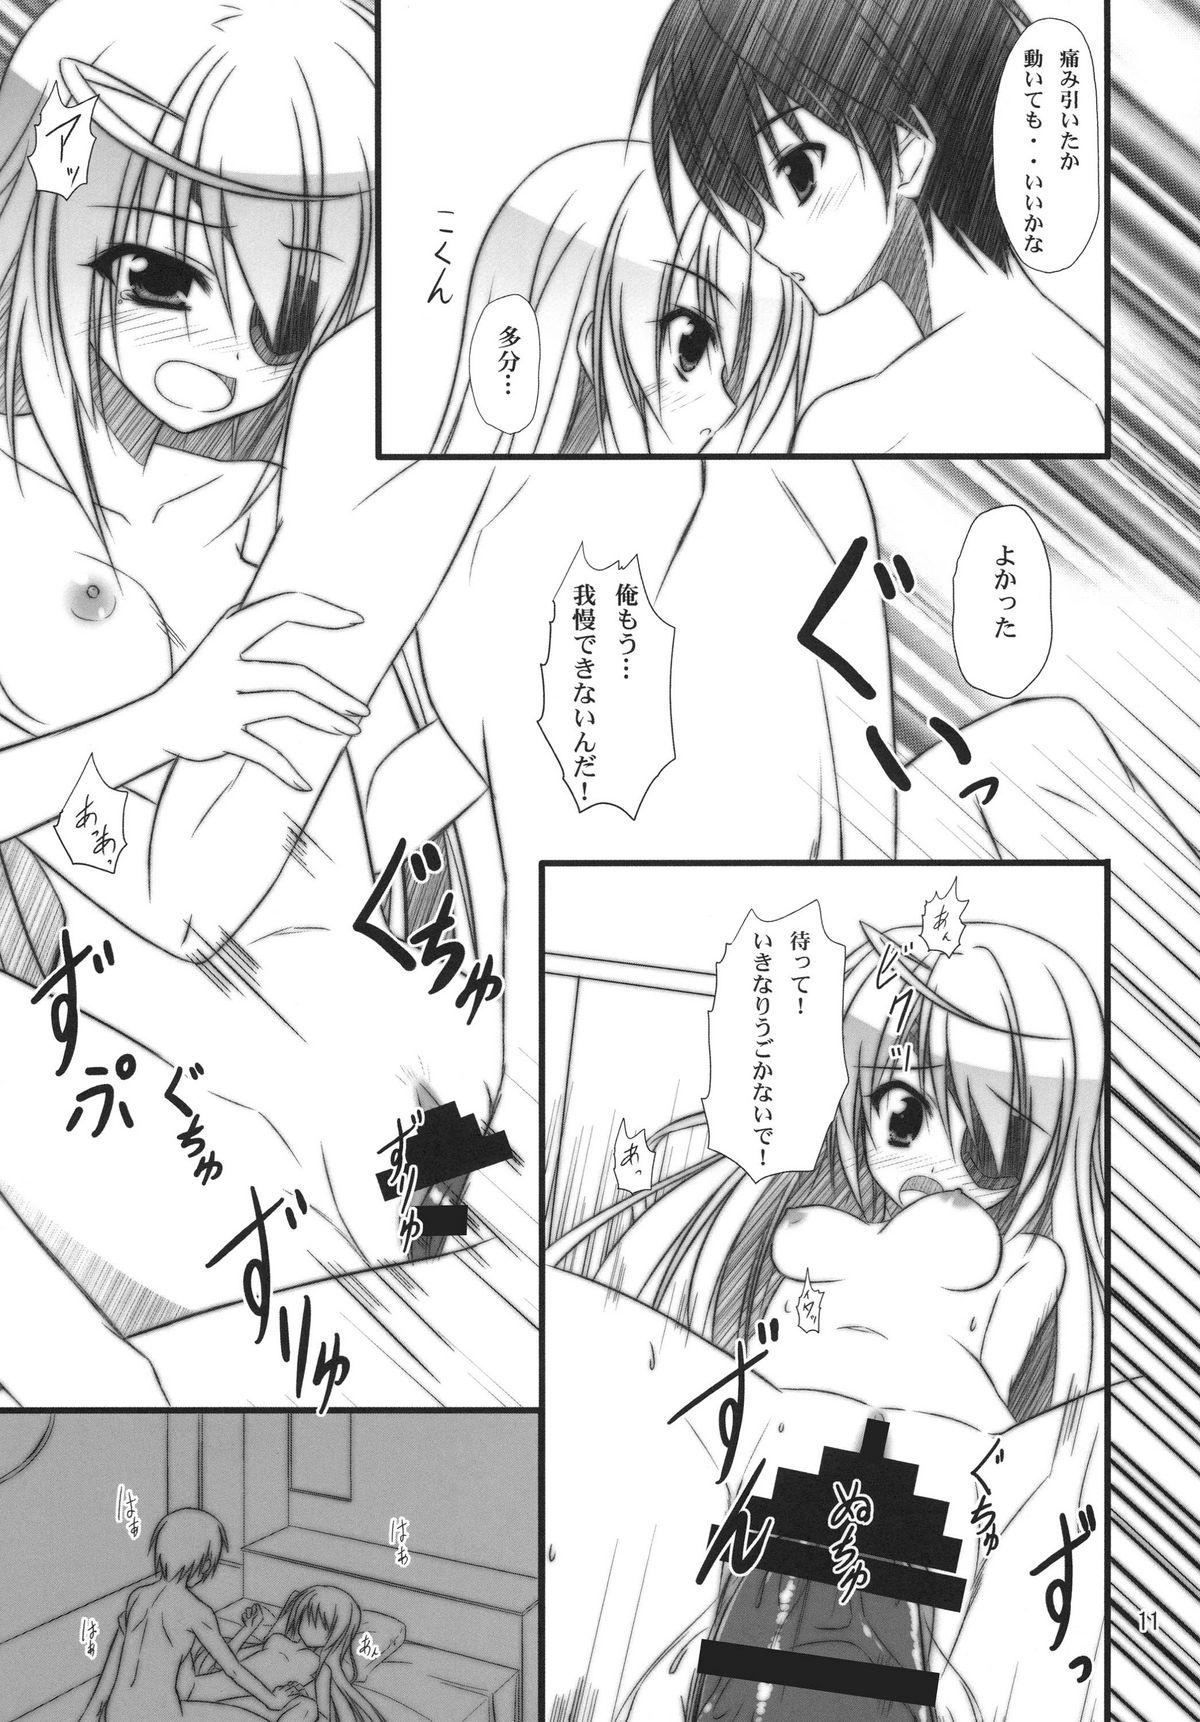 Selfie Bullet hole! - Infinite stratos Bwc - Page 11